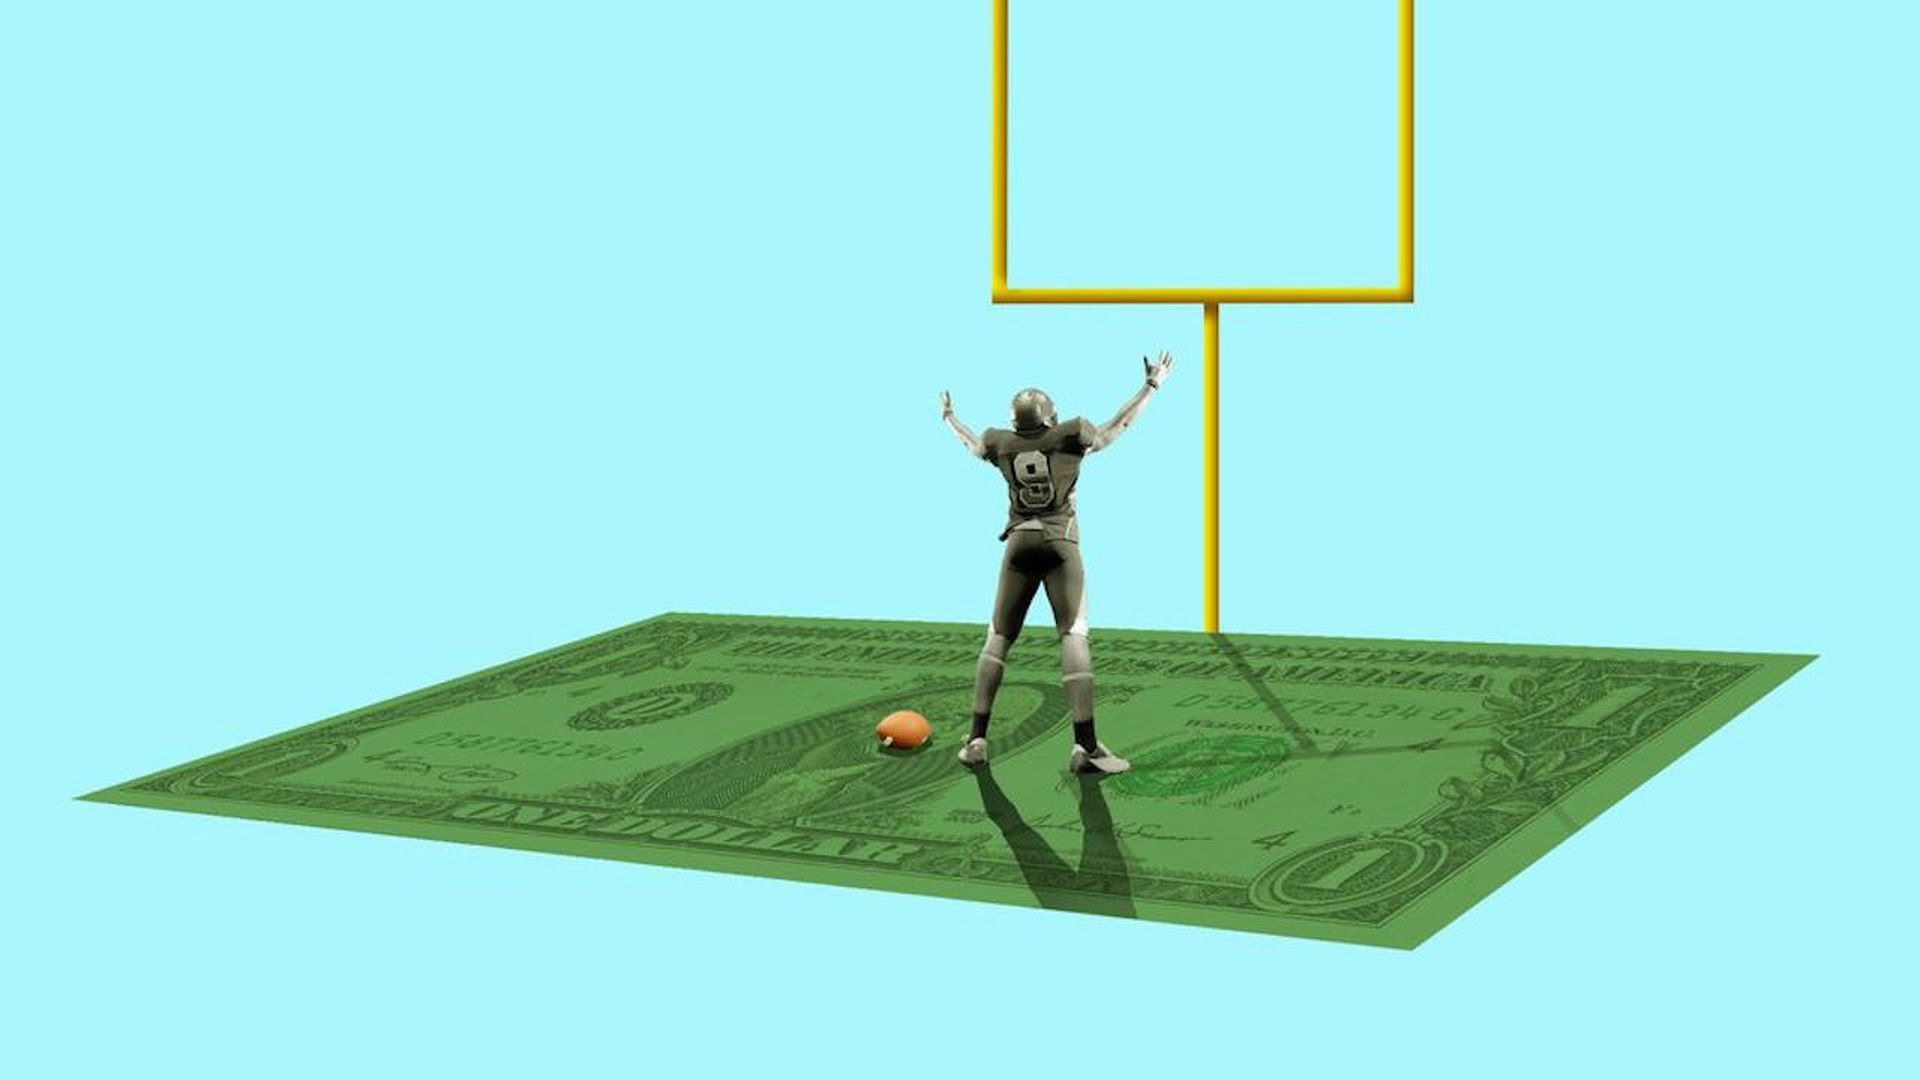 Illustration of football player on a field made of a huge dollar bill